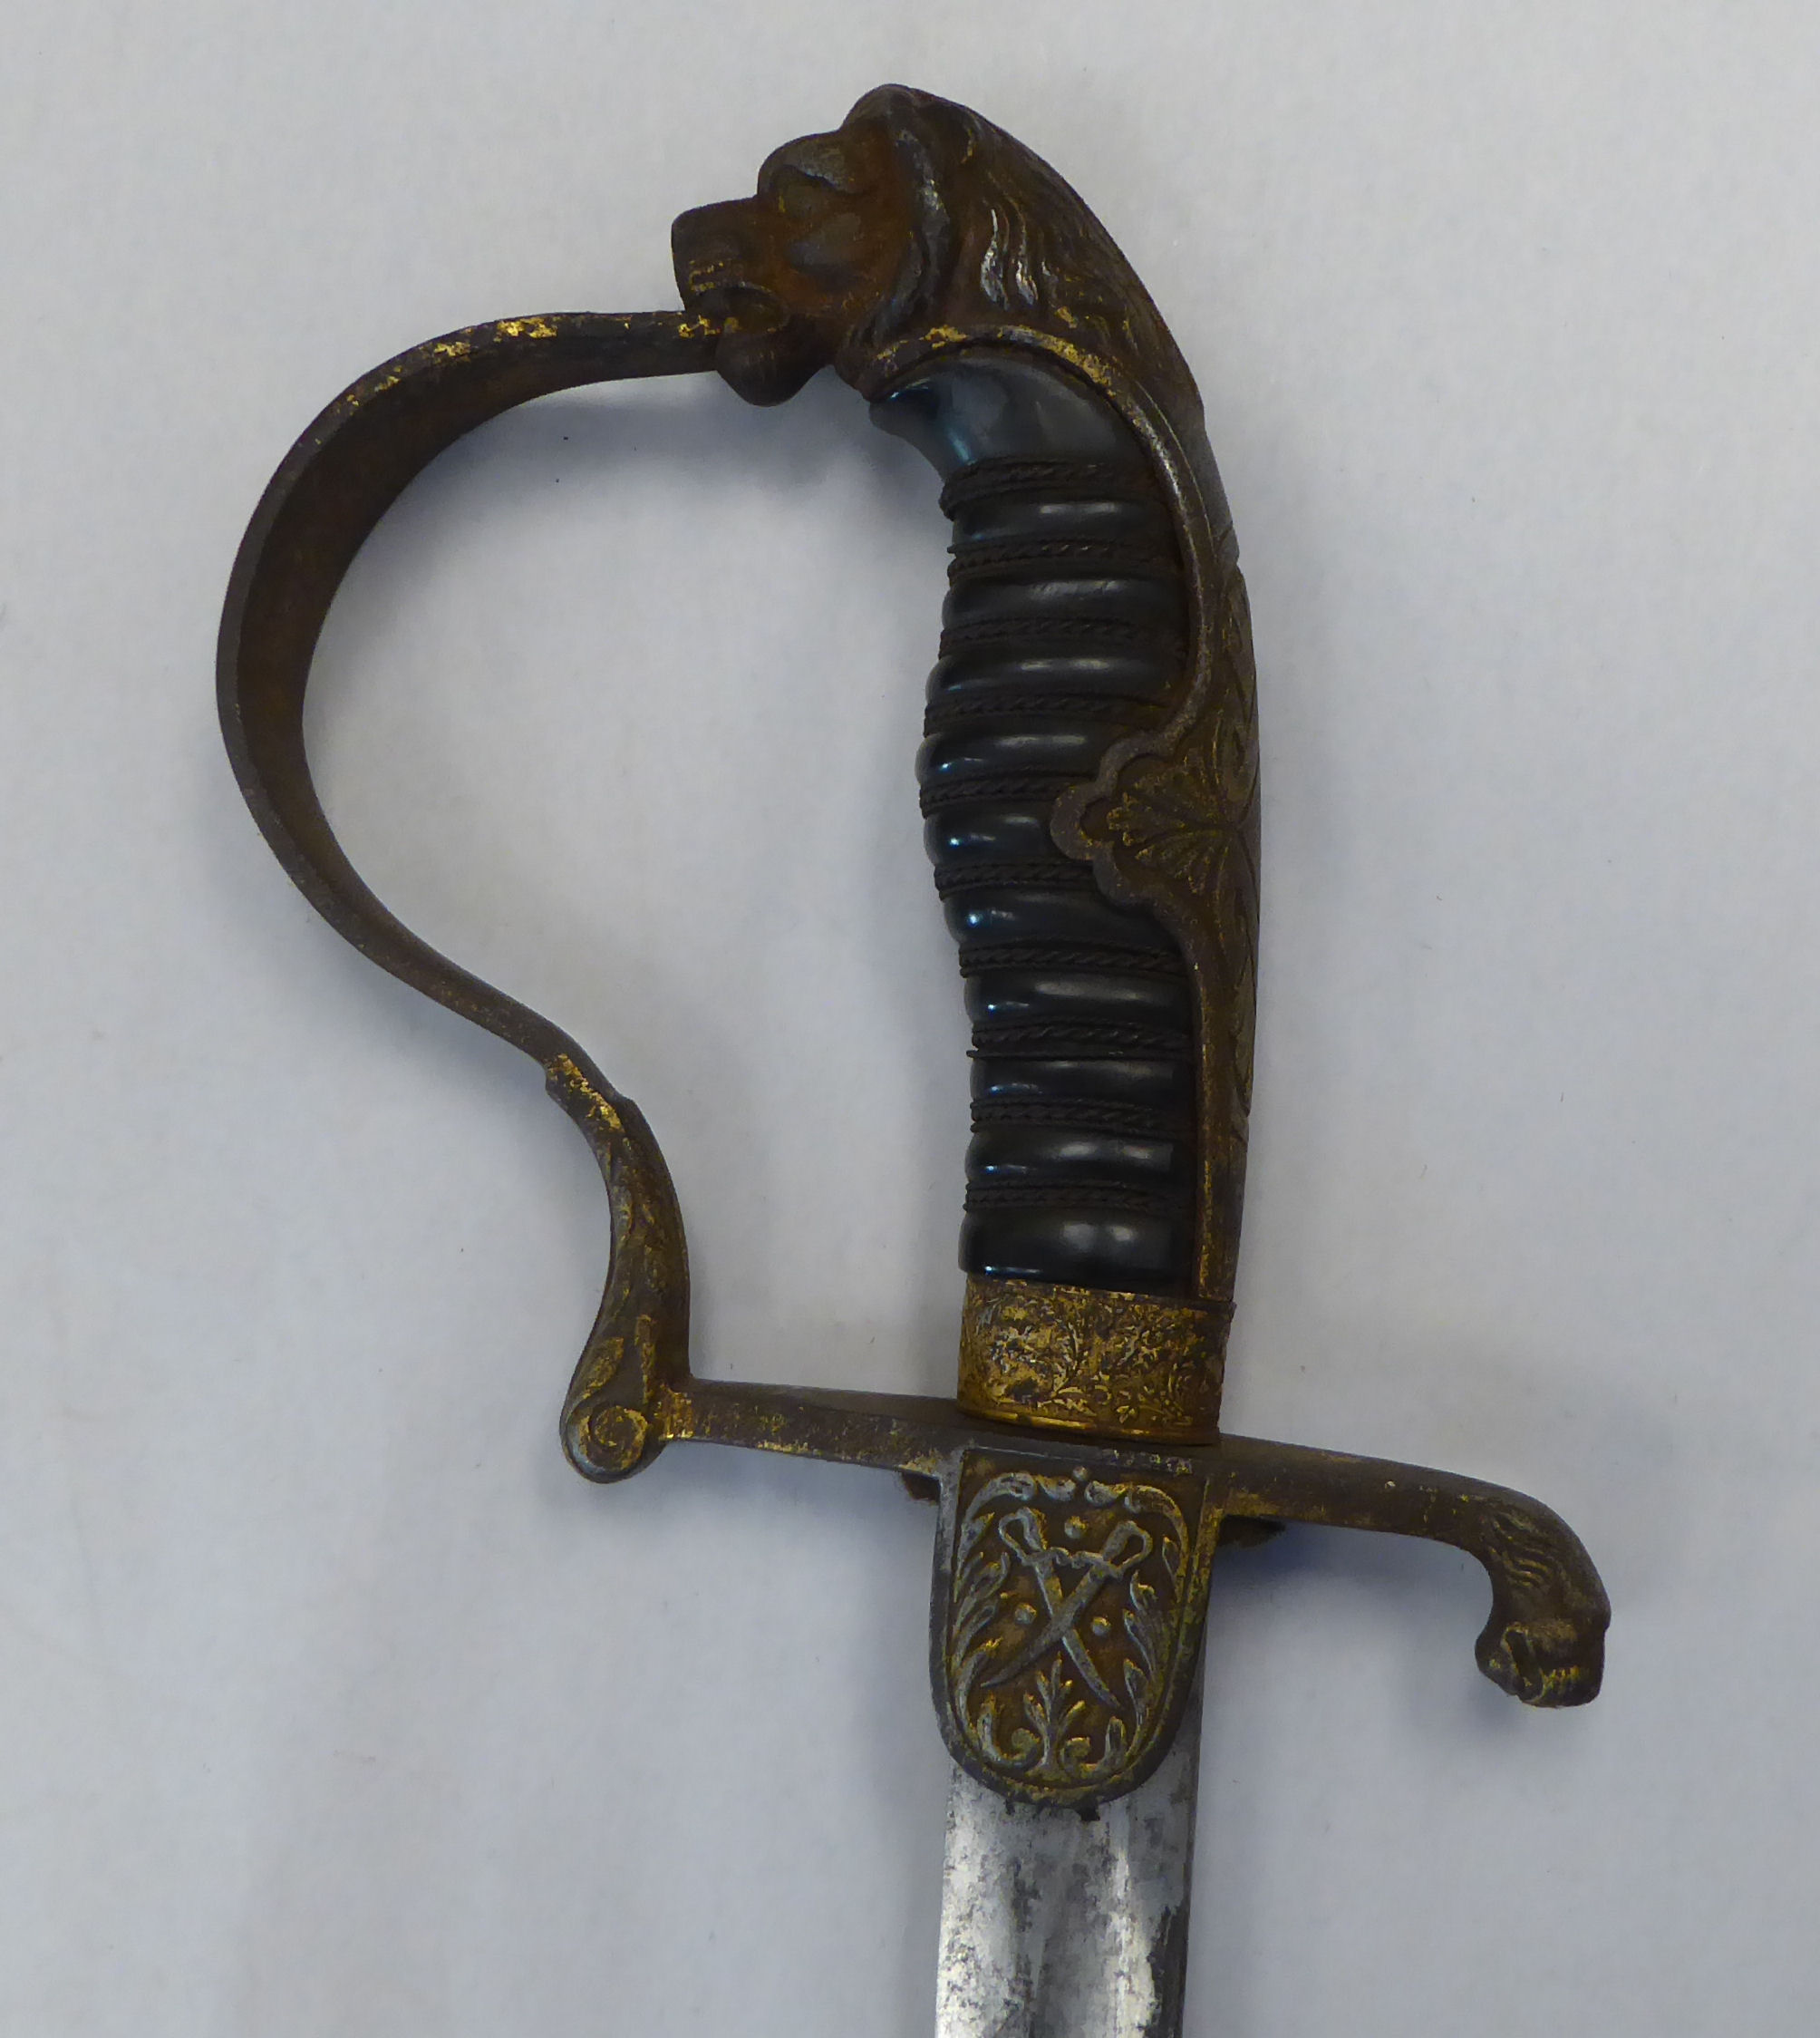 A German Weimar era cavalry dress sword with a gilded iron, lion's head pommel, guard, hilt and - Image 3 of 13